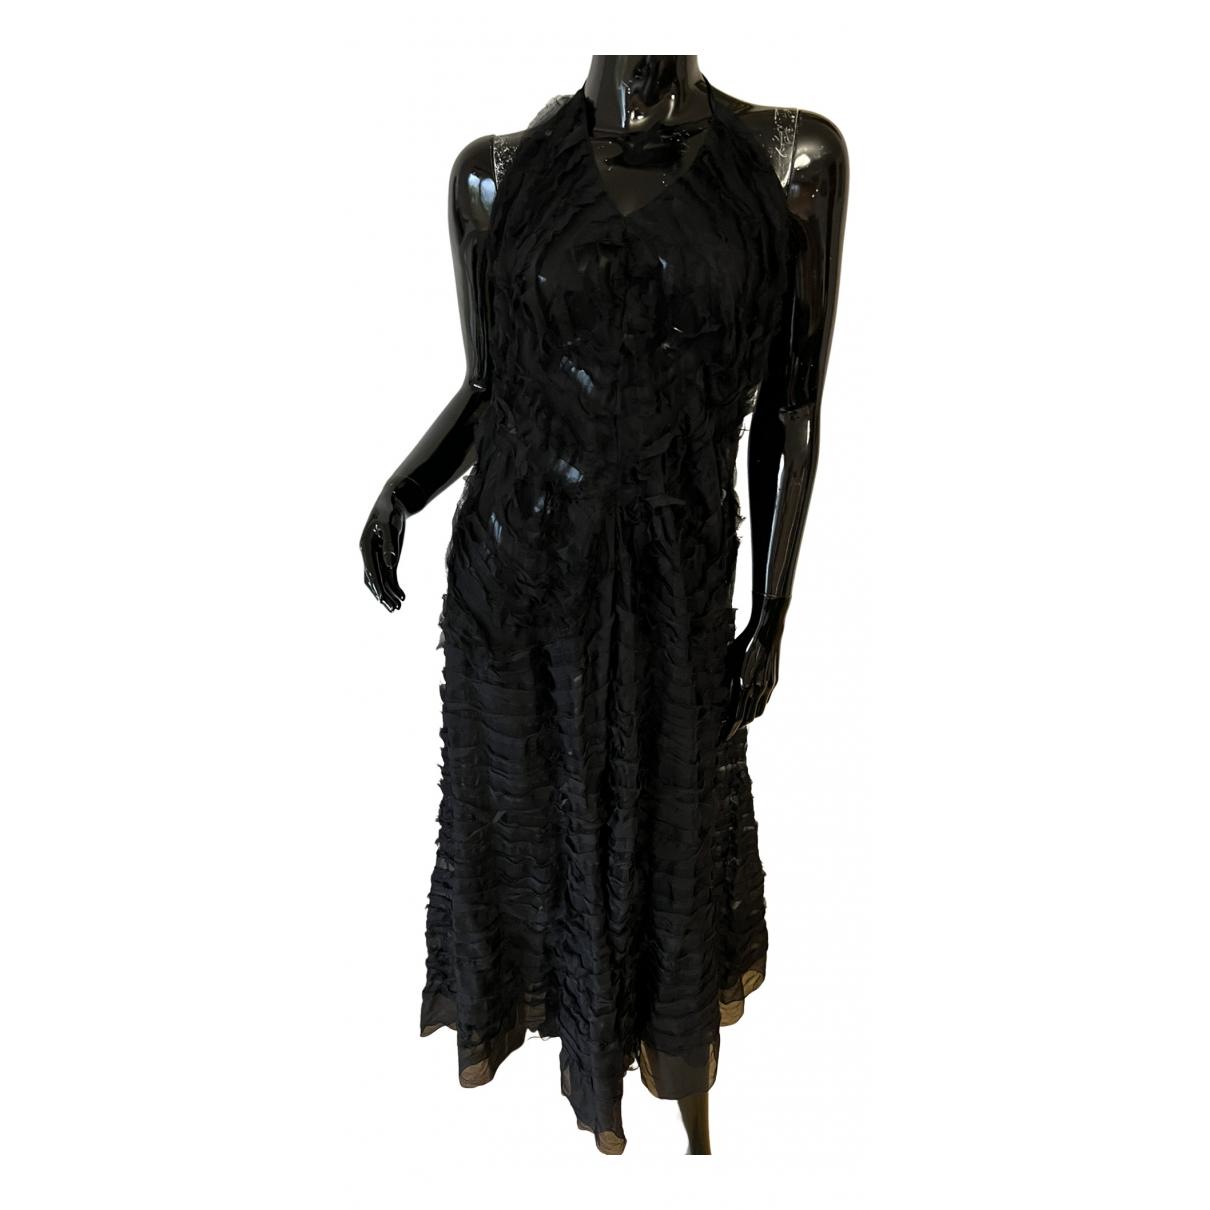 1980s Chanel Sheer Black Silk Evening Dress with Floral Embroidery